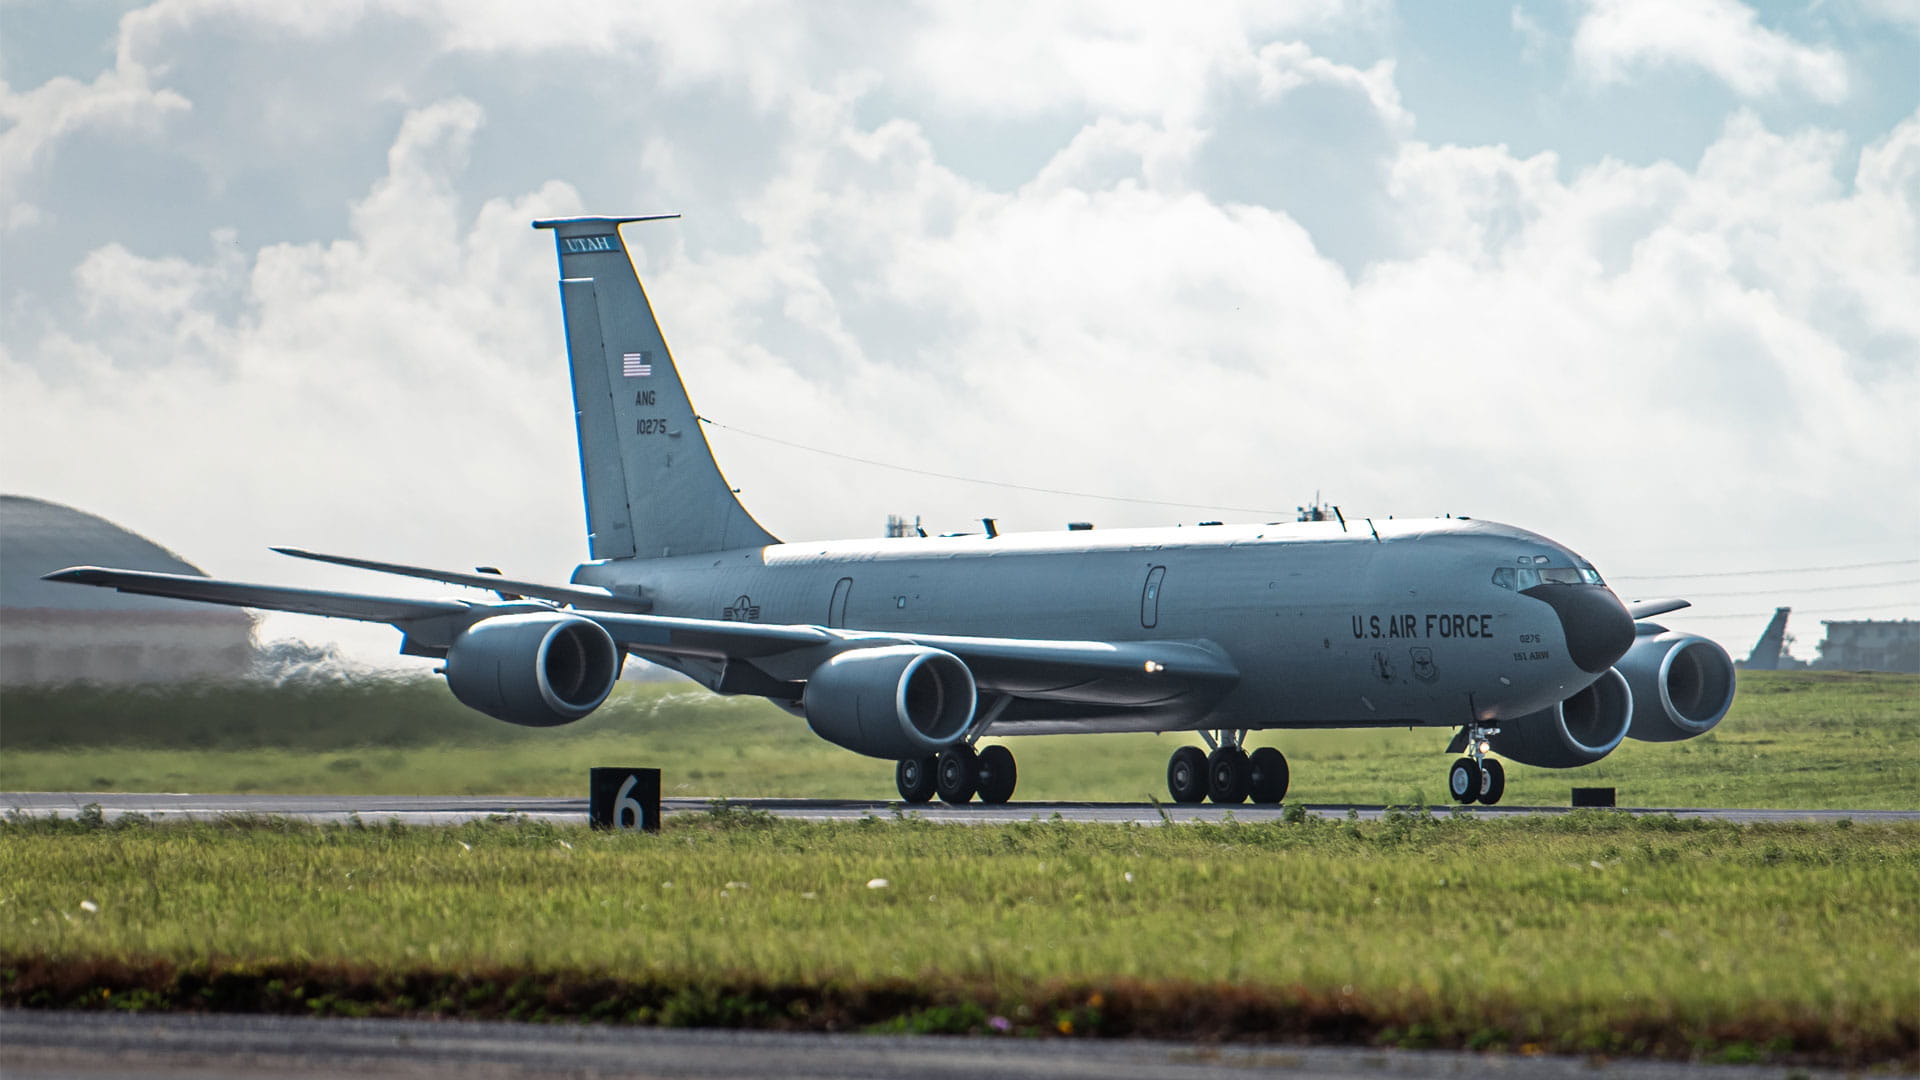 KC-135 on the runway